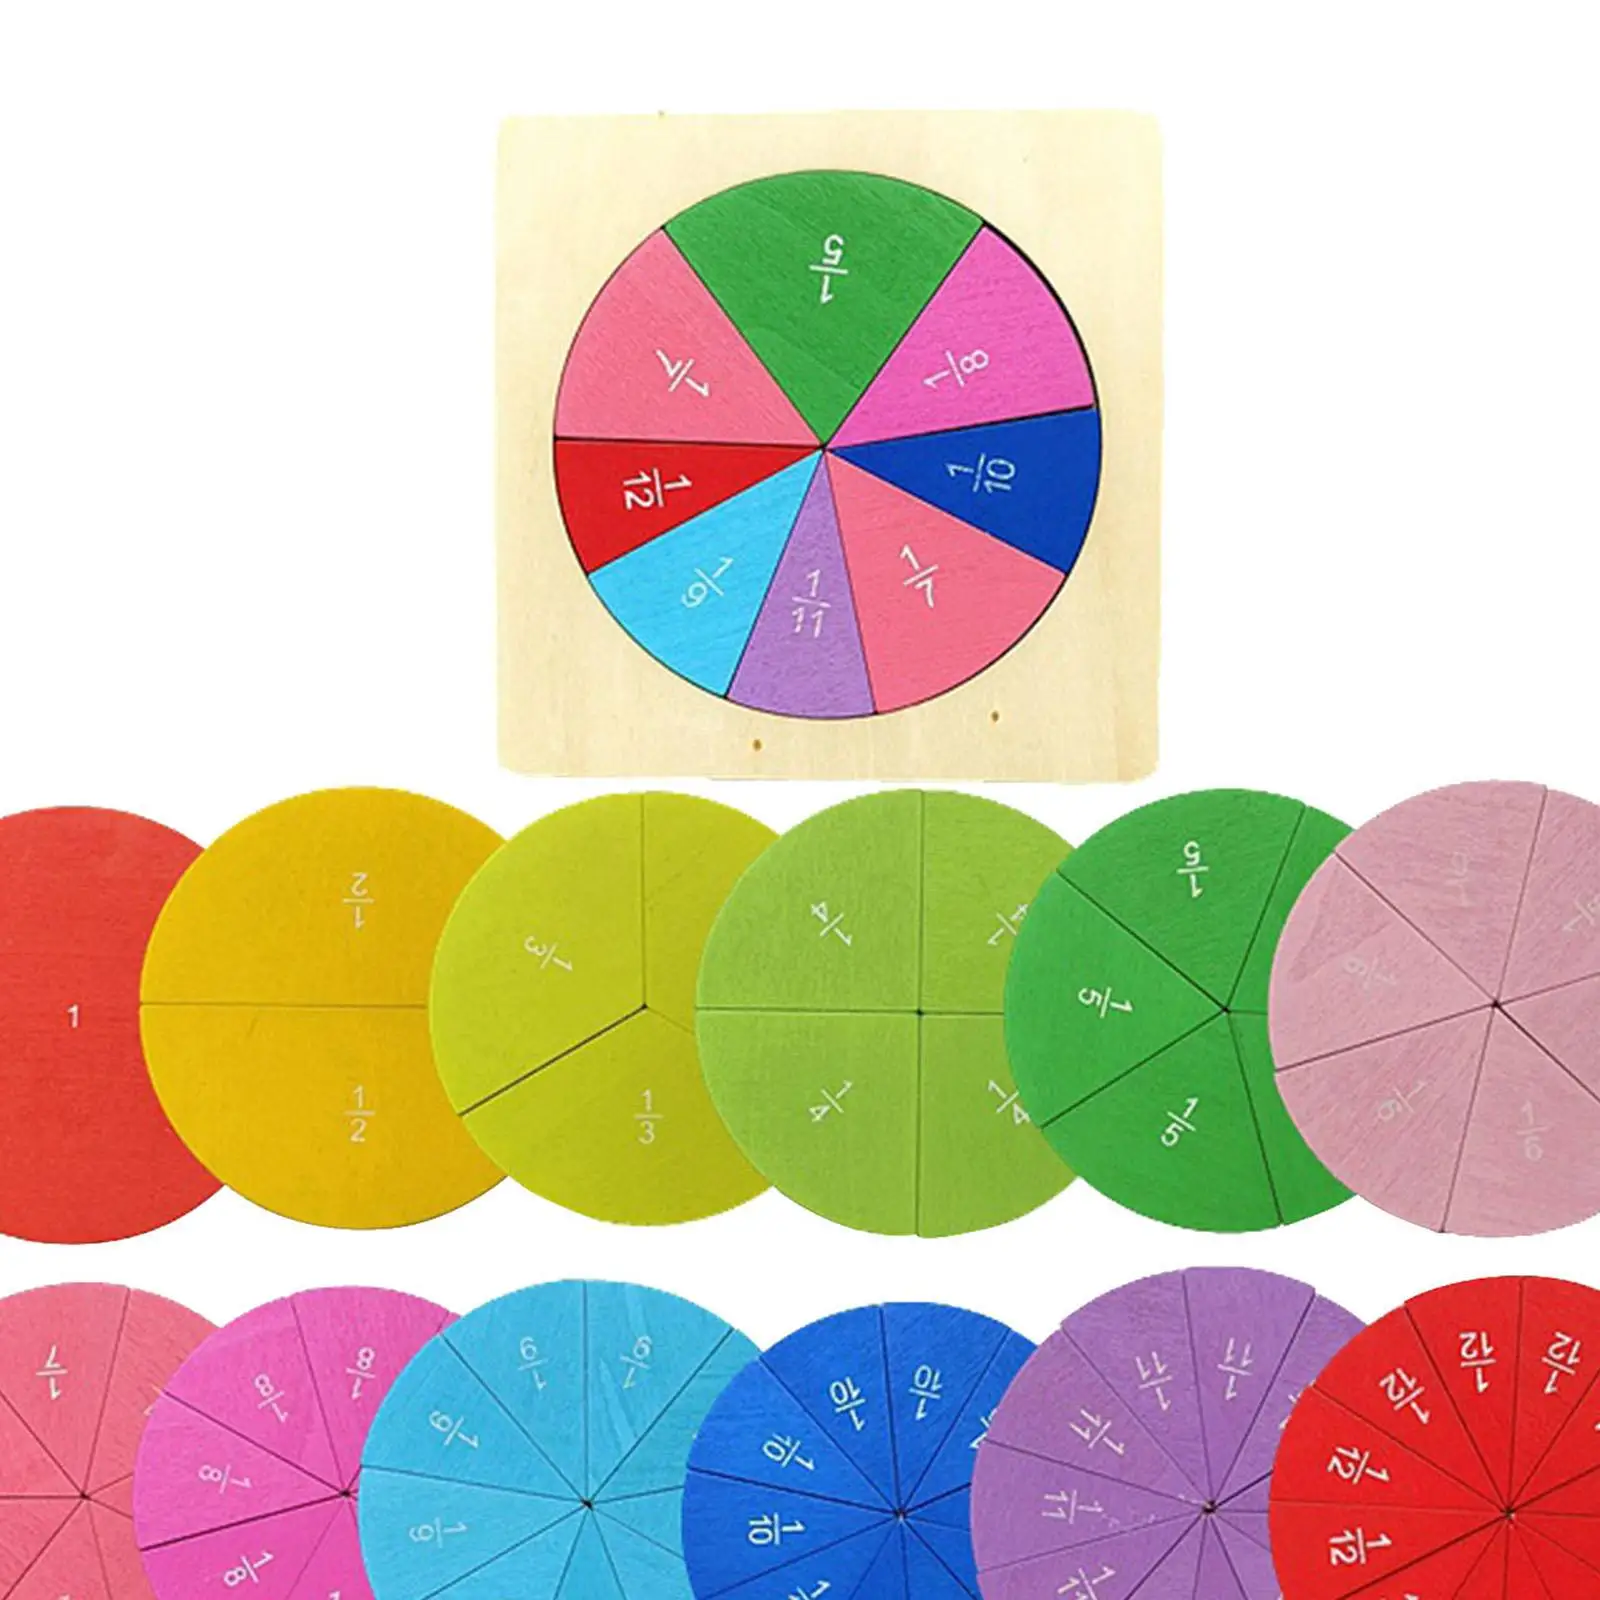 Fraction Circles Kids to Learn Fraction Kids Valentines Gifts Math Learning Toys for Children Girls Boys Age 6 7 8 9 10